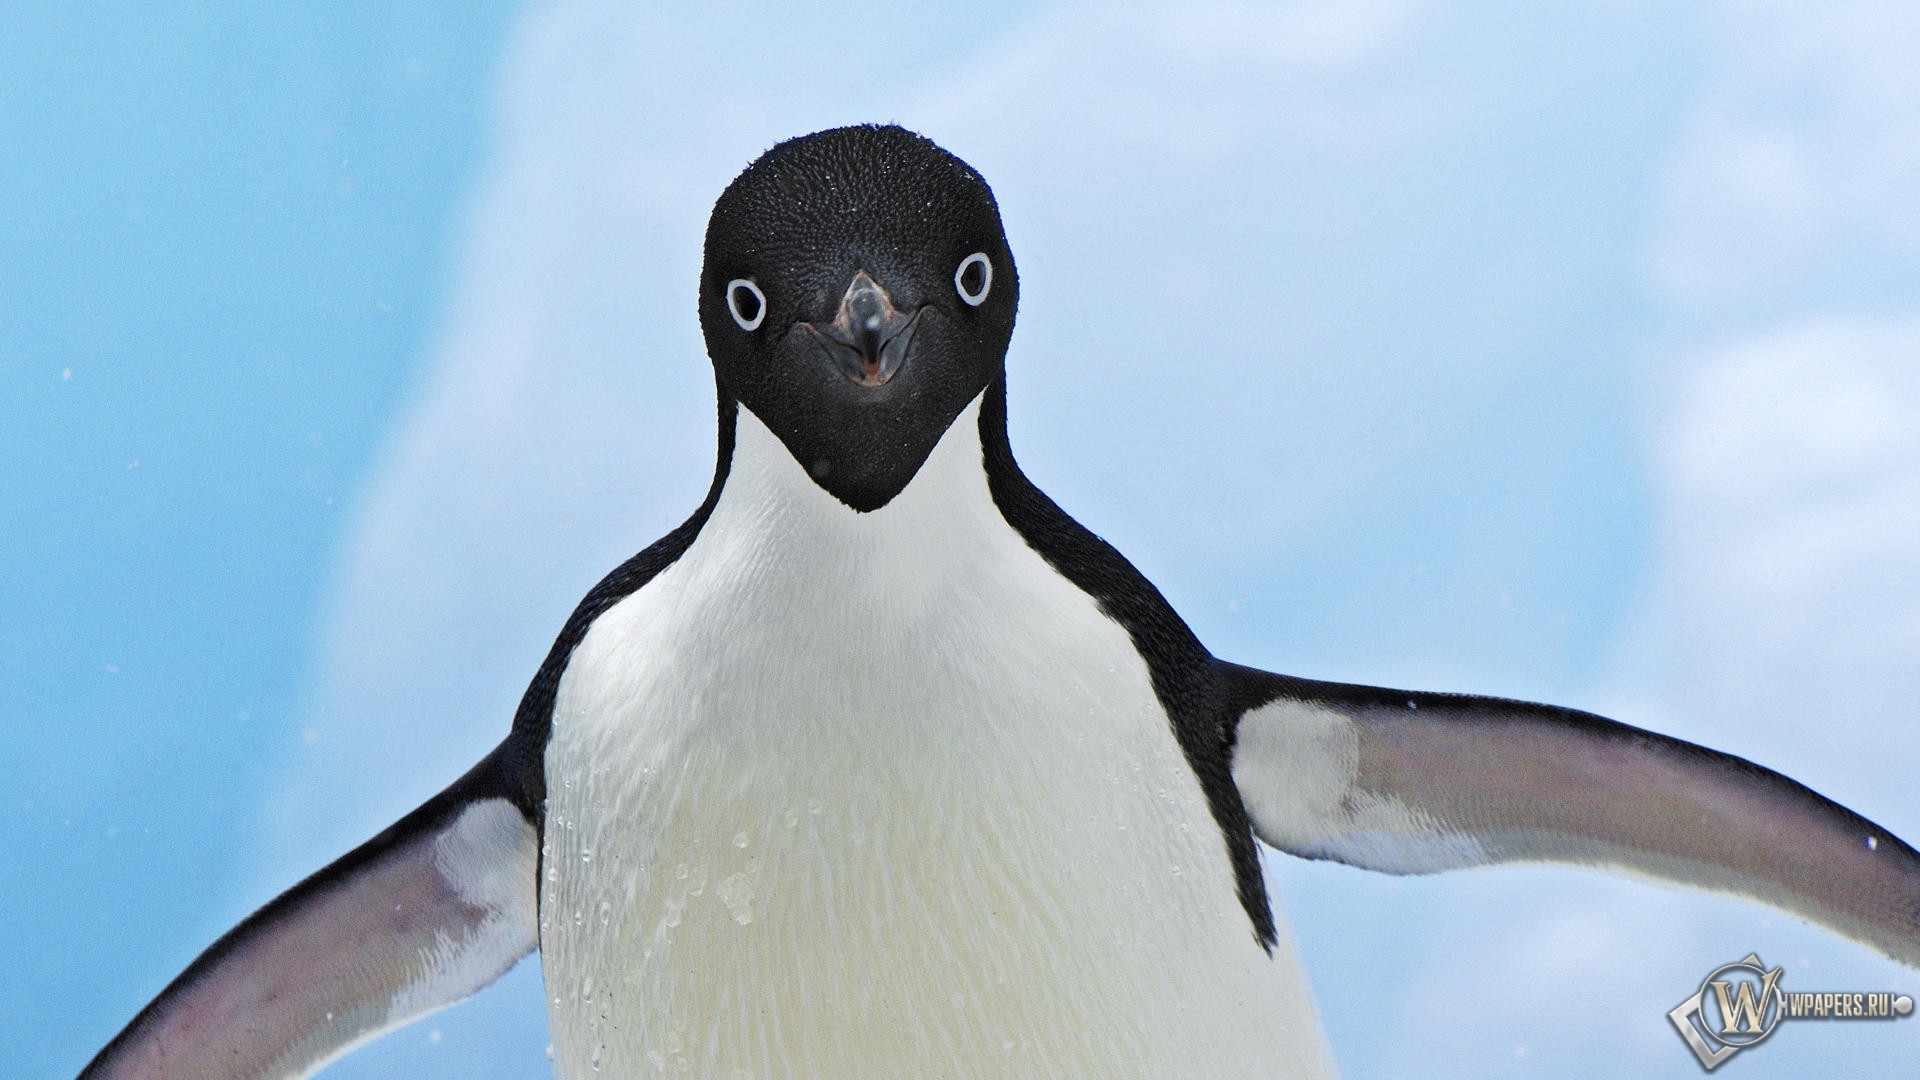 http://wpapers.ru/wallpapers/animals/Penguins/6025/1920x1080_%D0%9F%D0%B8%D0%BD%D0%B3%D0%B2%D0%B8%D0%BD.jpg